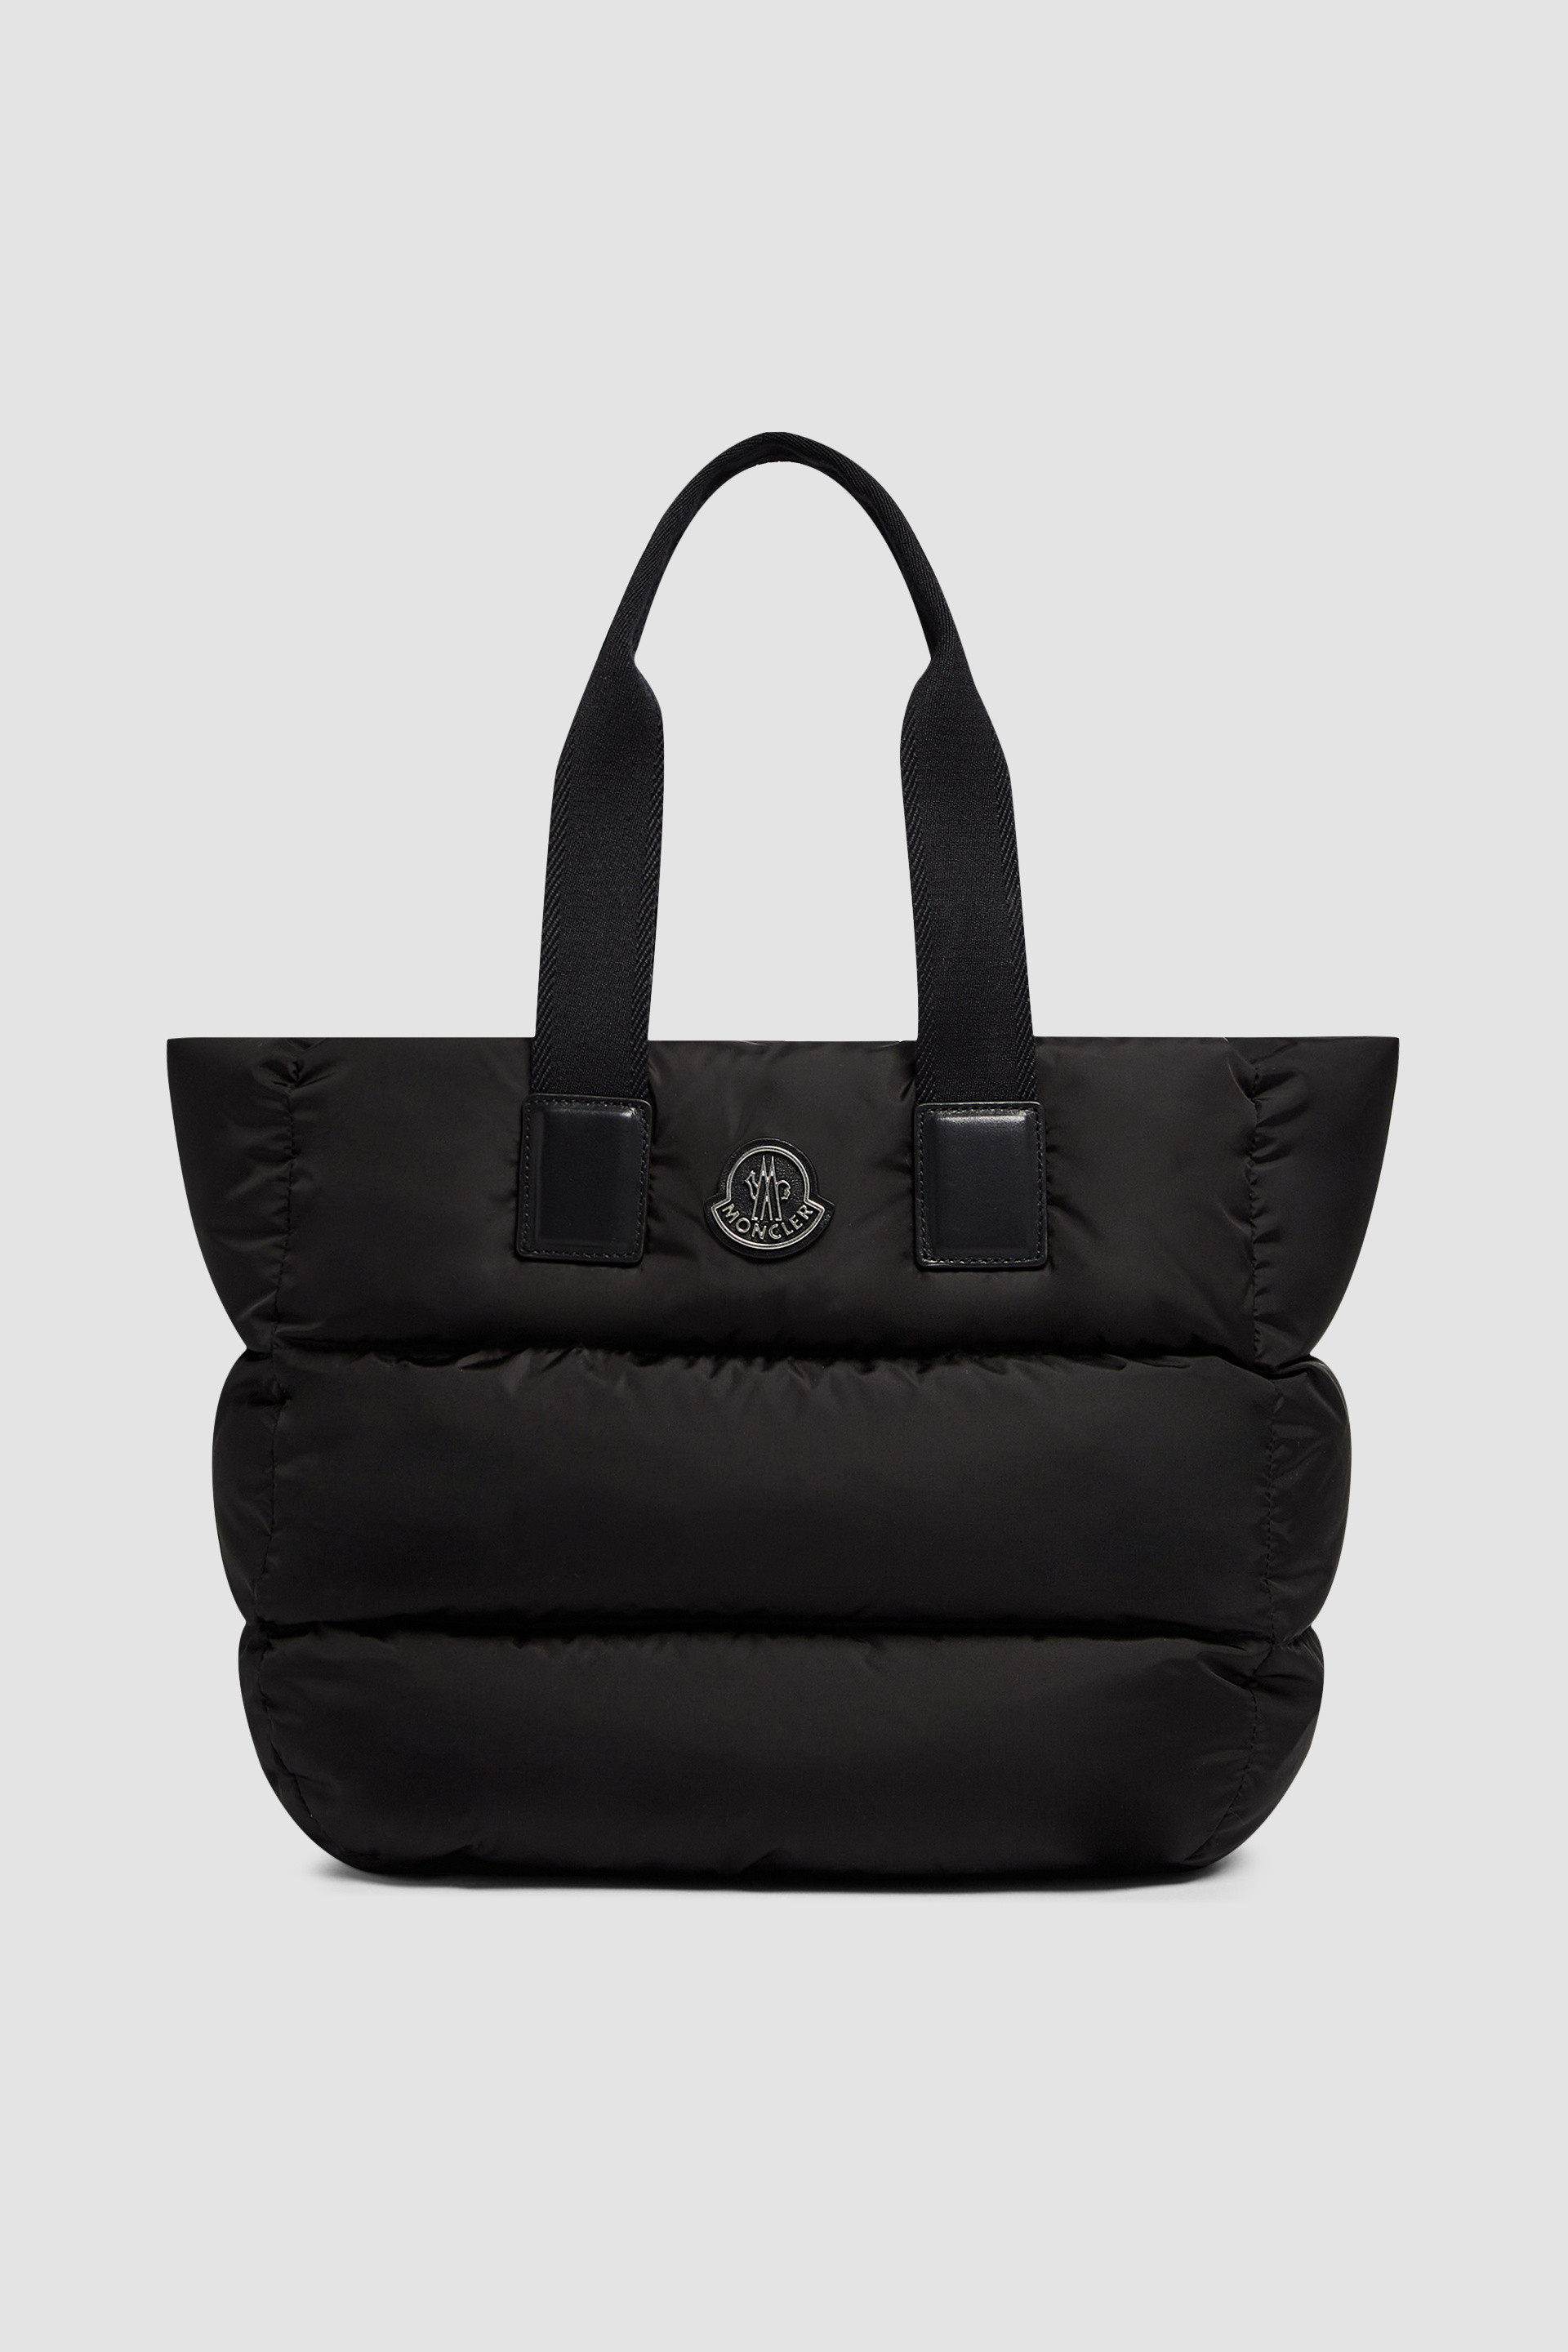 MONCLER  LEA SMALL/2way  ハンドバッグ トートバッグcodemoncle